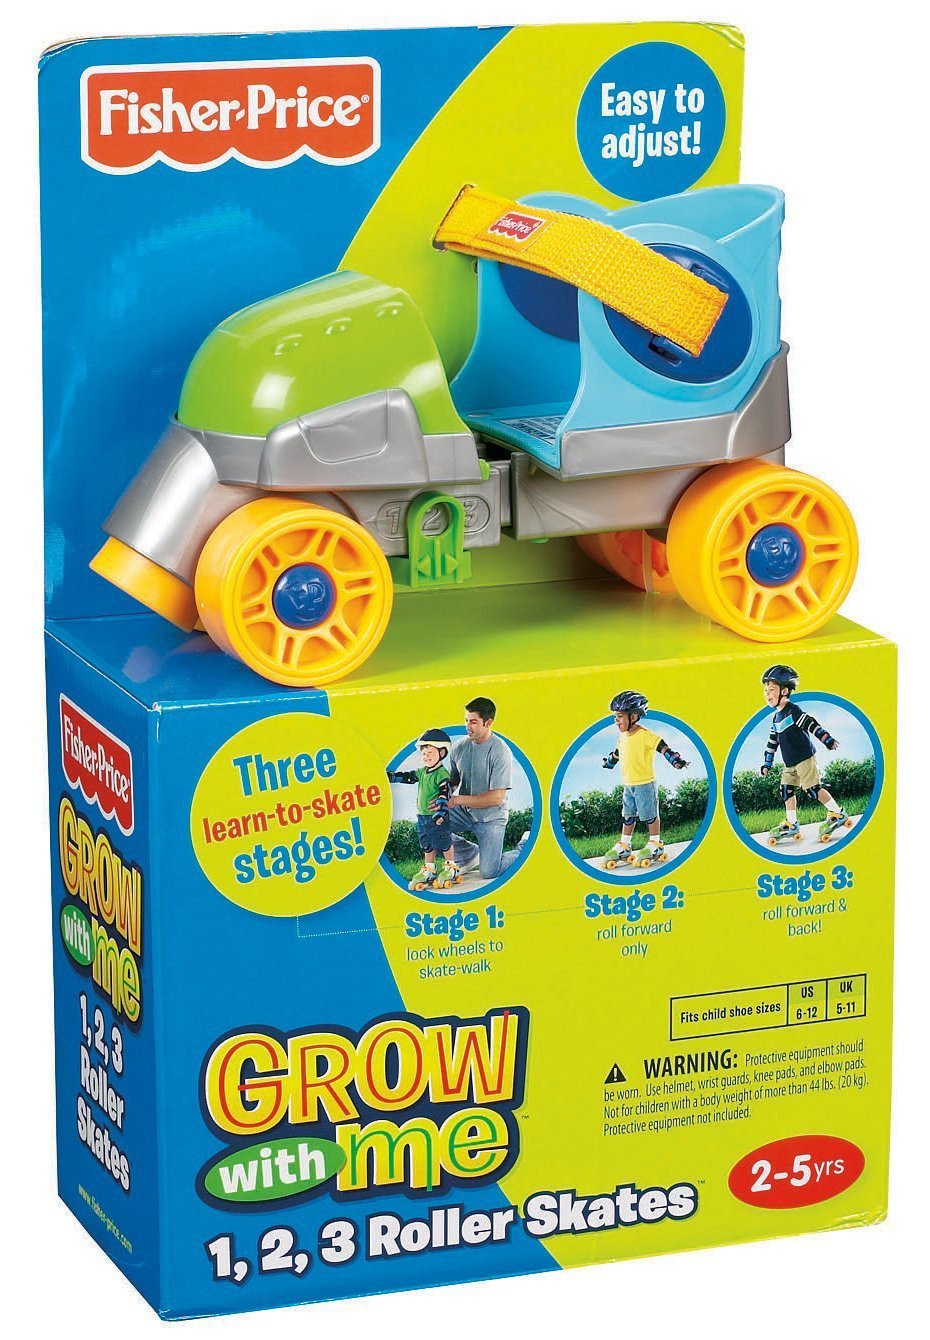 Fisher-Price Grow with Me 1,2,3 Roller Skates (Deals on Amazon!)